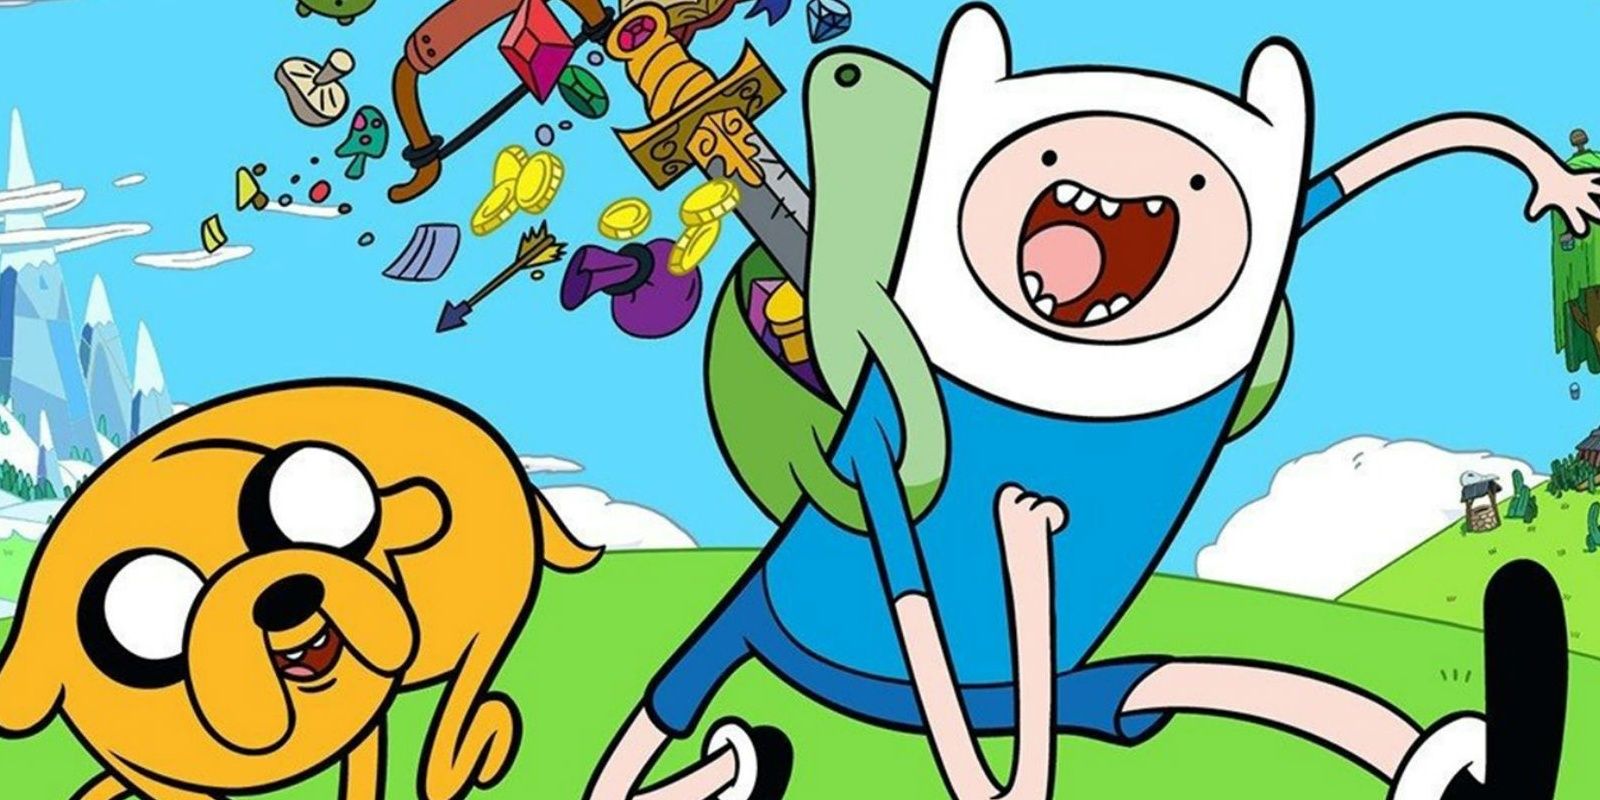 Jake the dog runs behind Finn who has an opened backpack. A sword, gold coins and several other items fly out from behind Finn. 